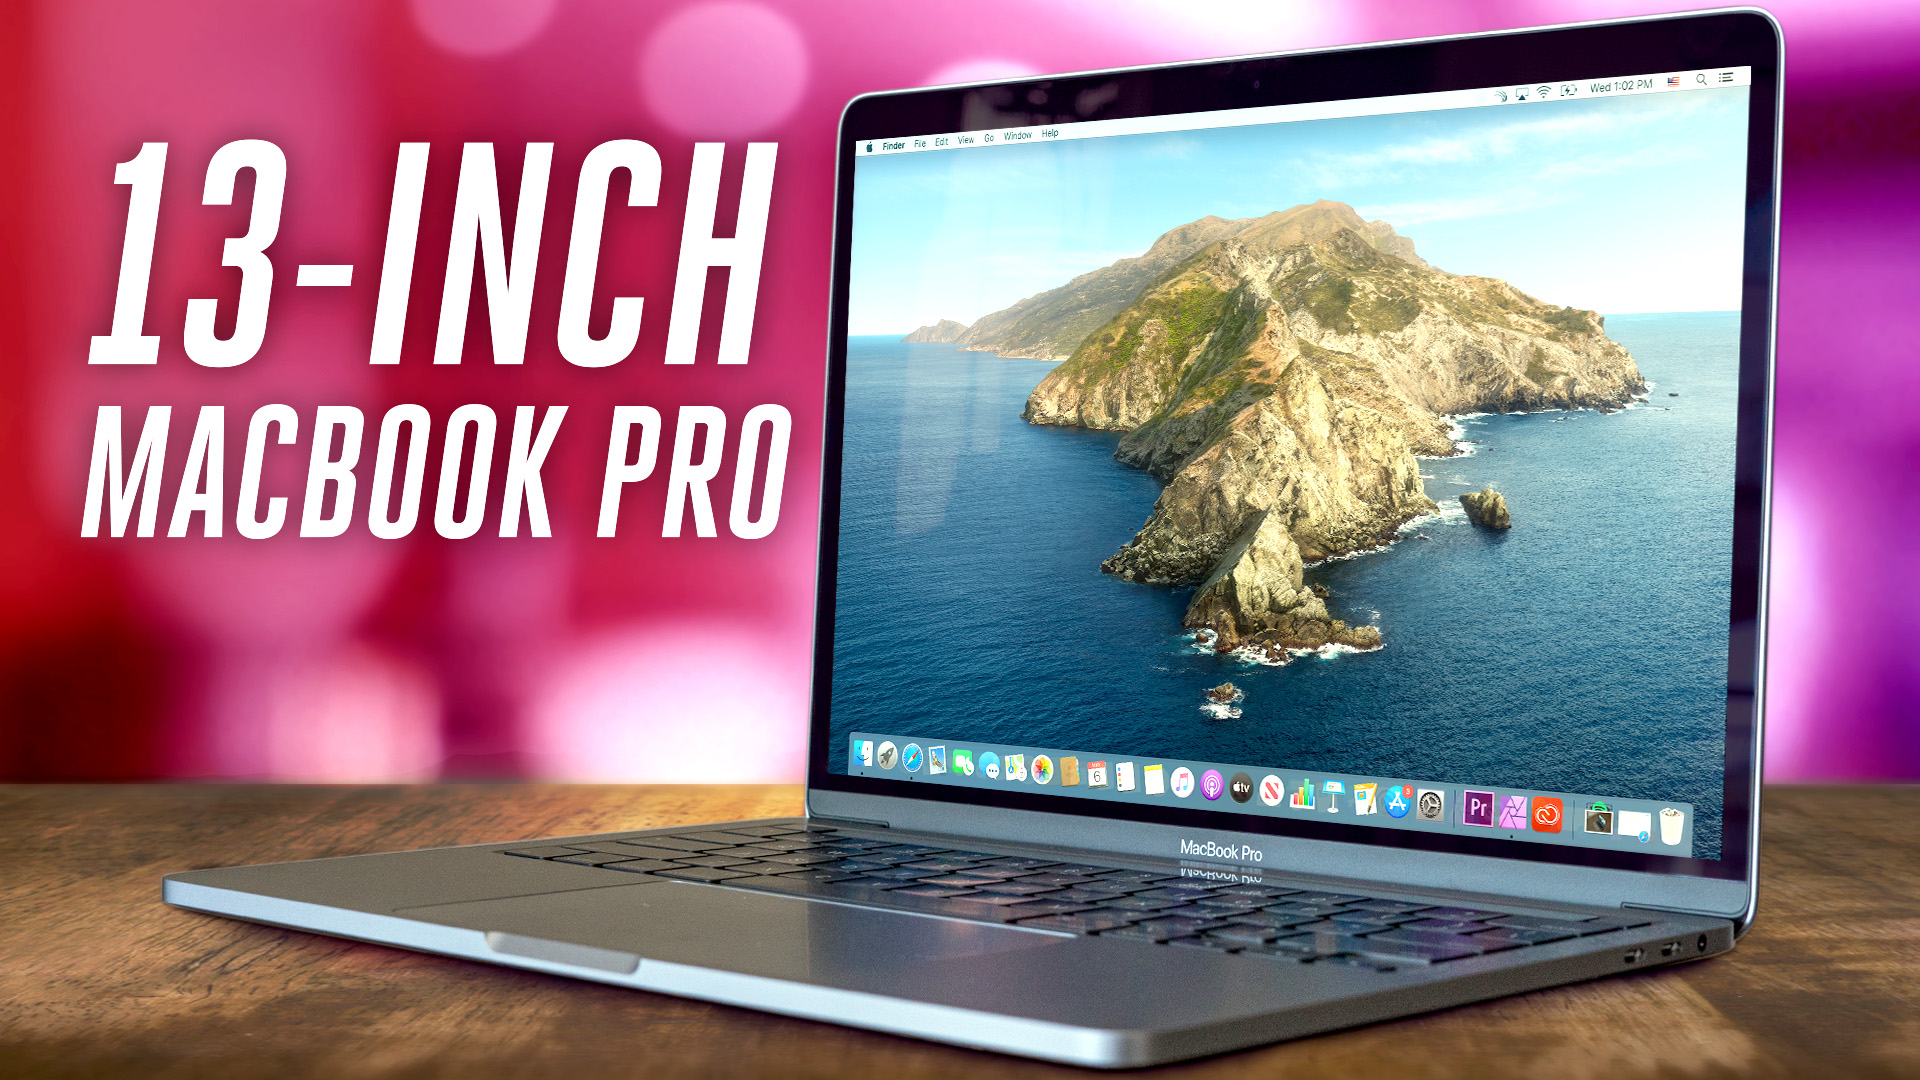 Apple MacBook Pro (13-Inch, 2020) Review: Portable, Powerful, Pedestrian